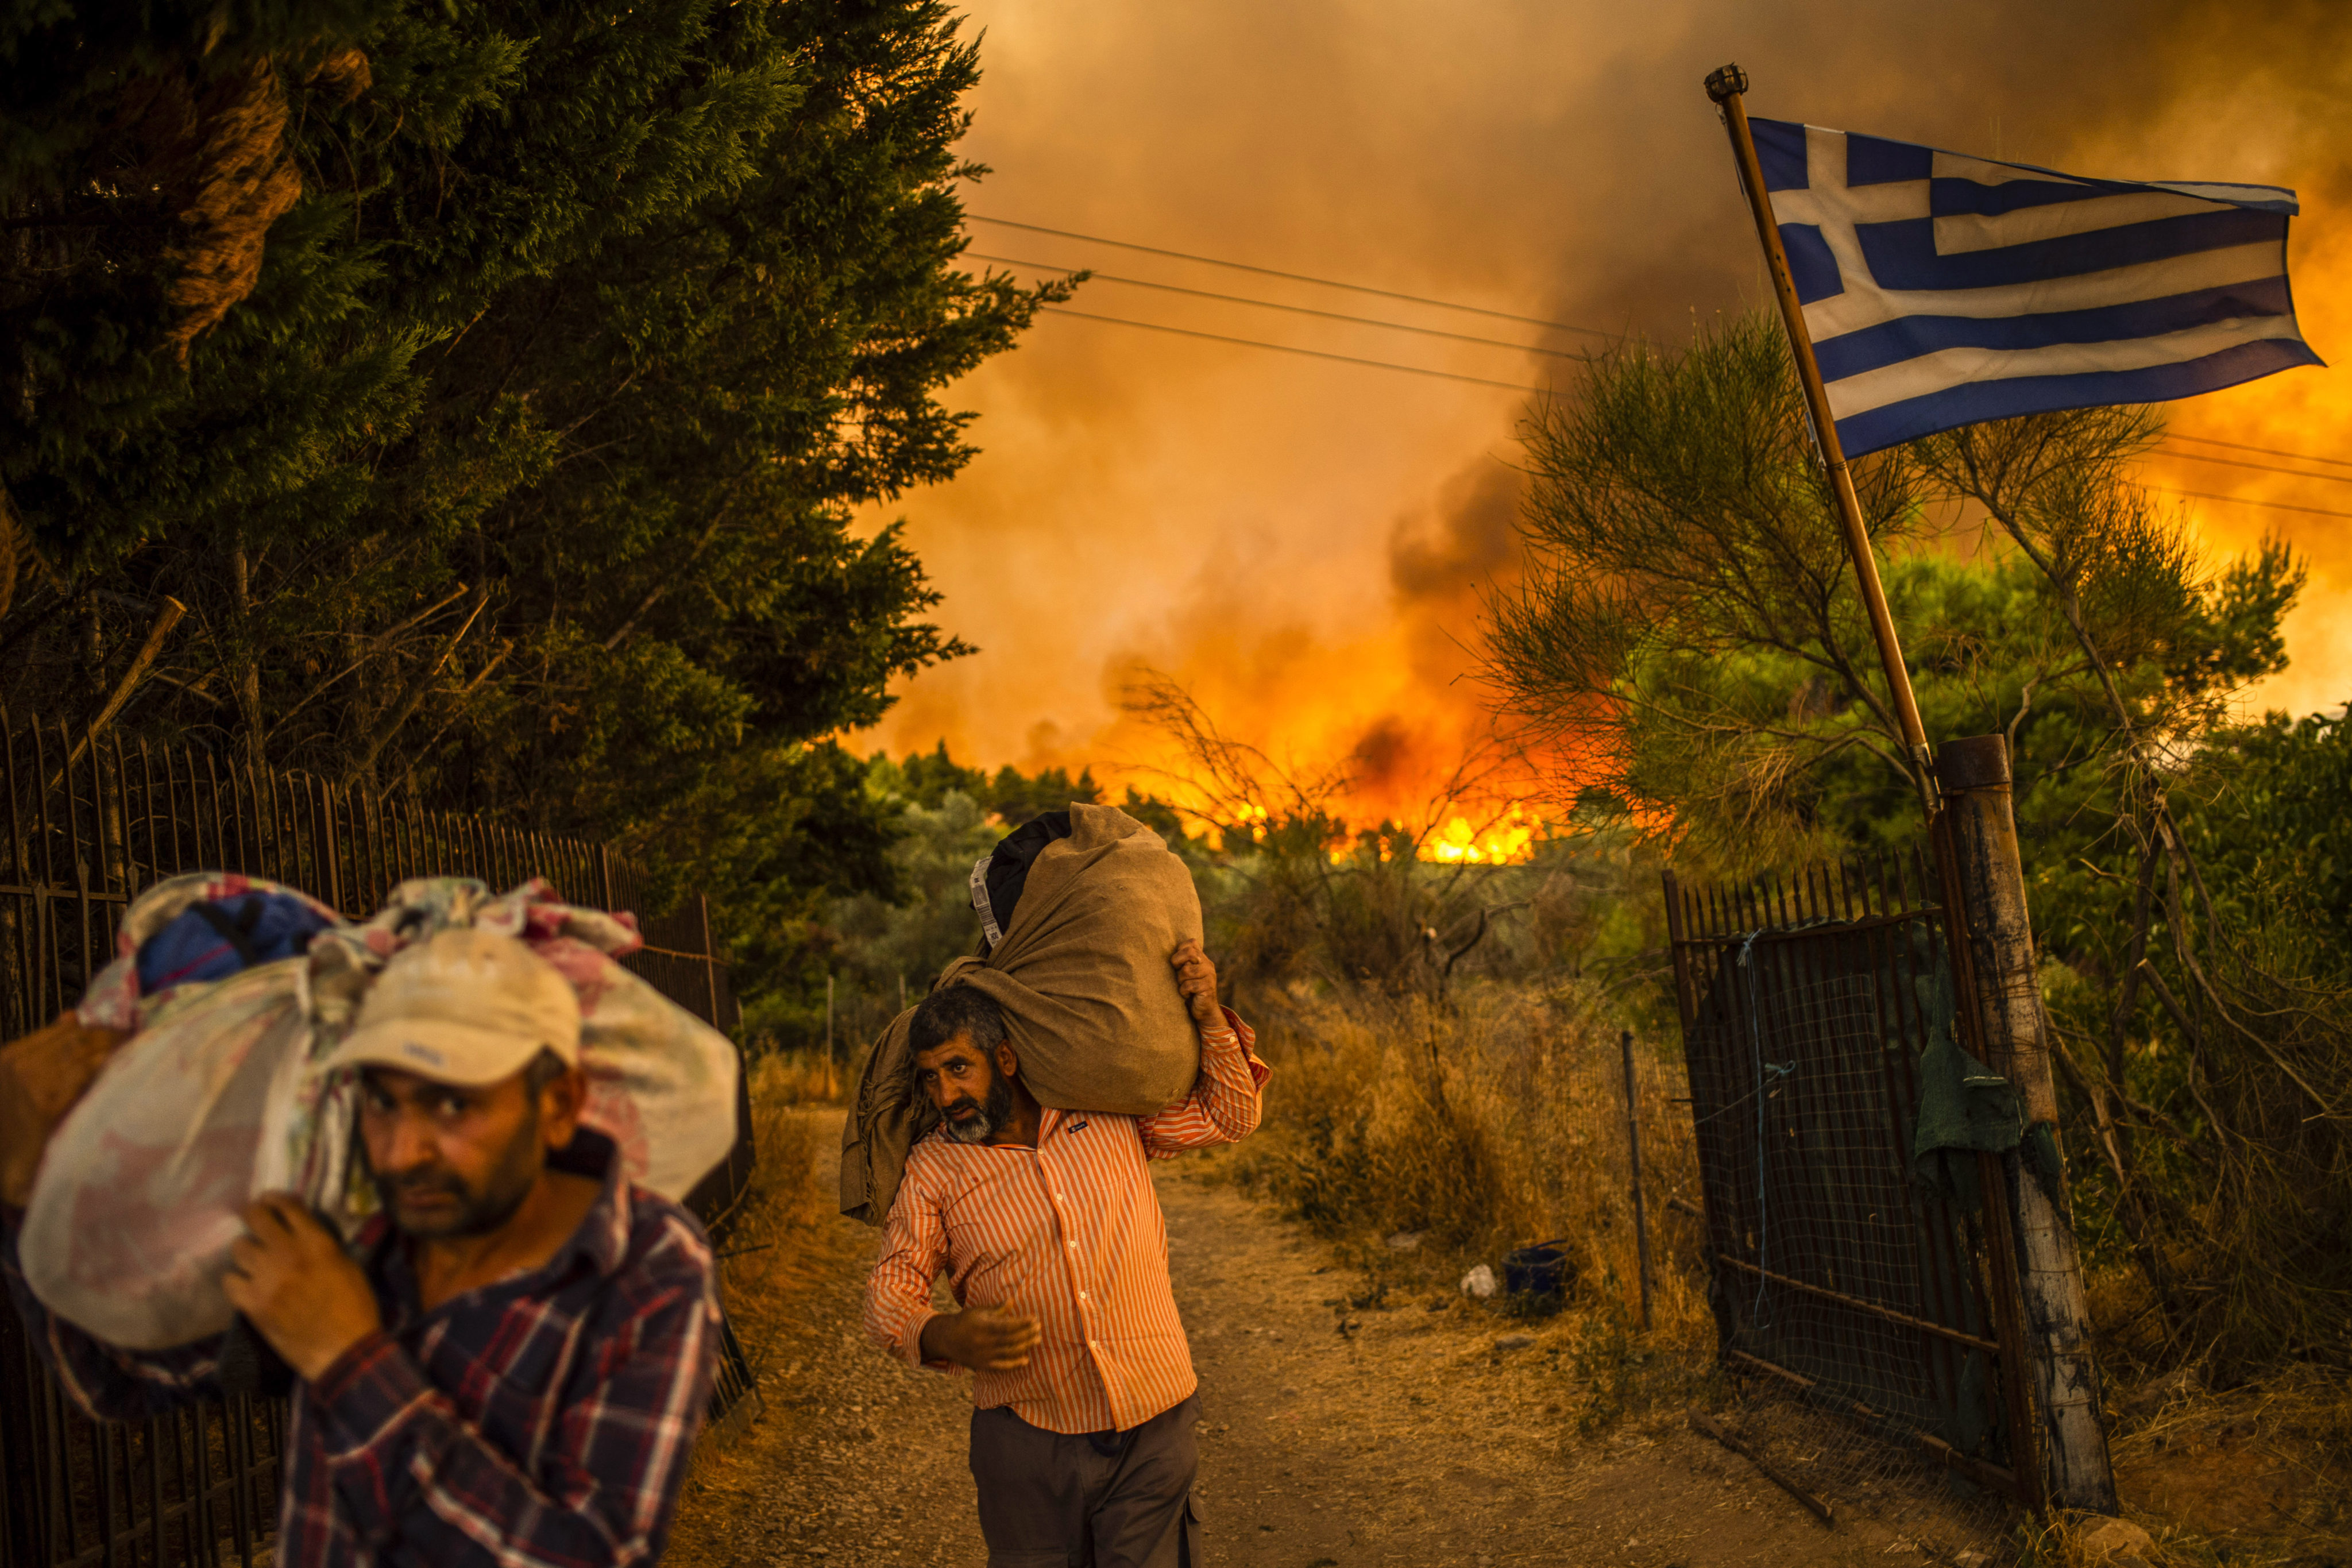 People move their belongings to safety as a wildfire rages in a wooded area north of Athens on August 6. Photo: DPA